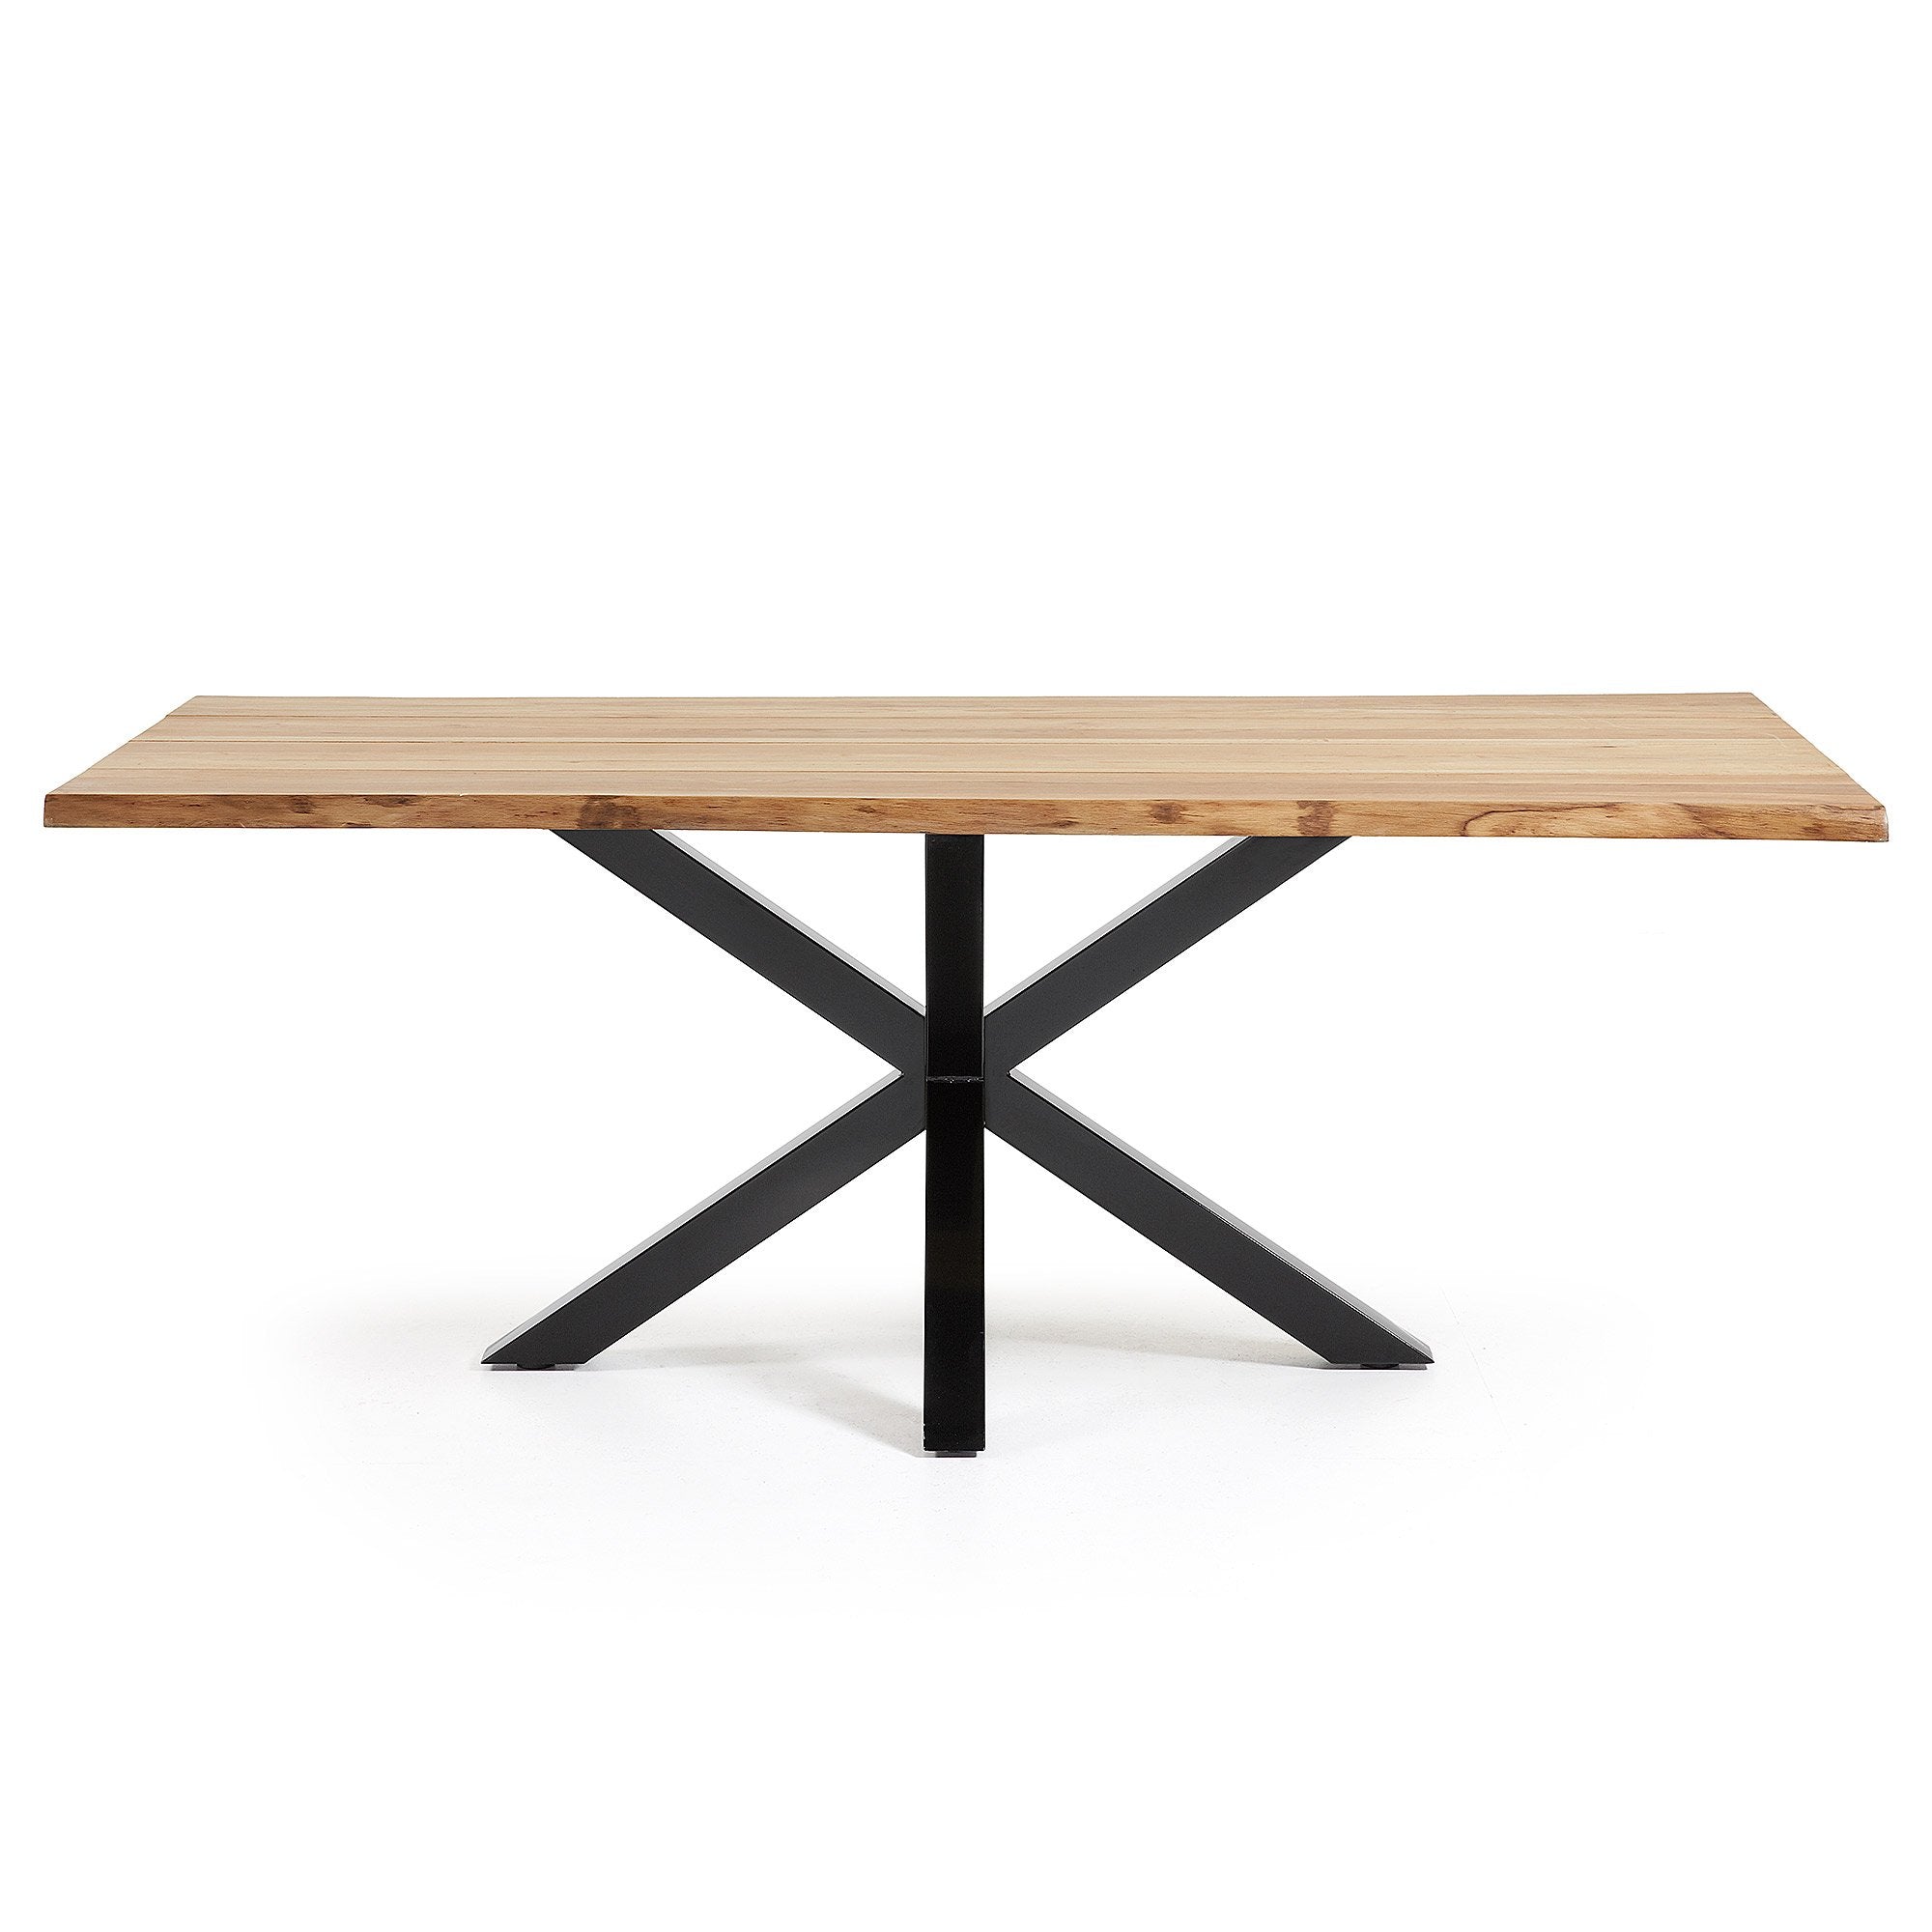 Diego 2.2m Natural Oak Dining Table - Black - Dining Tables